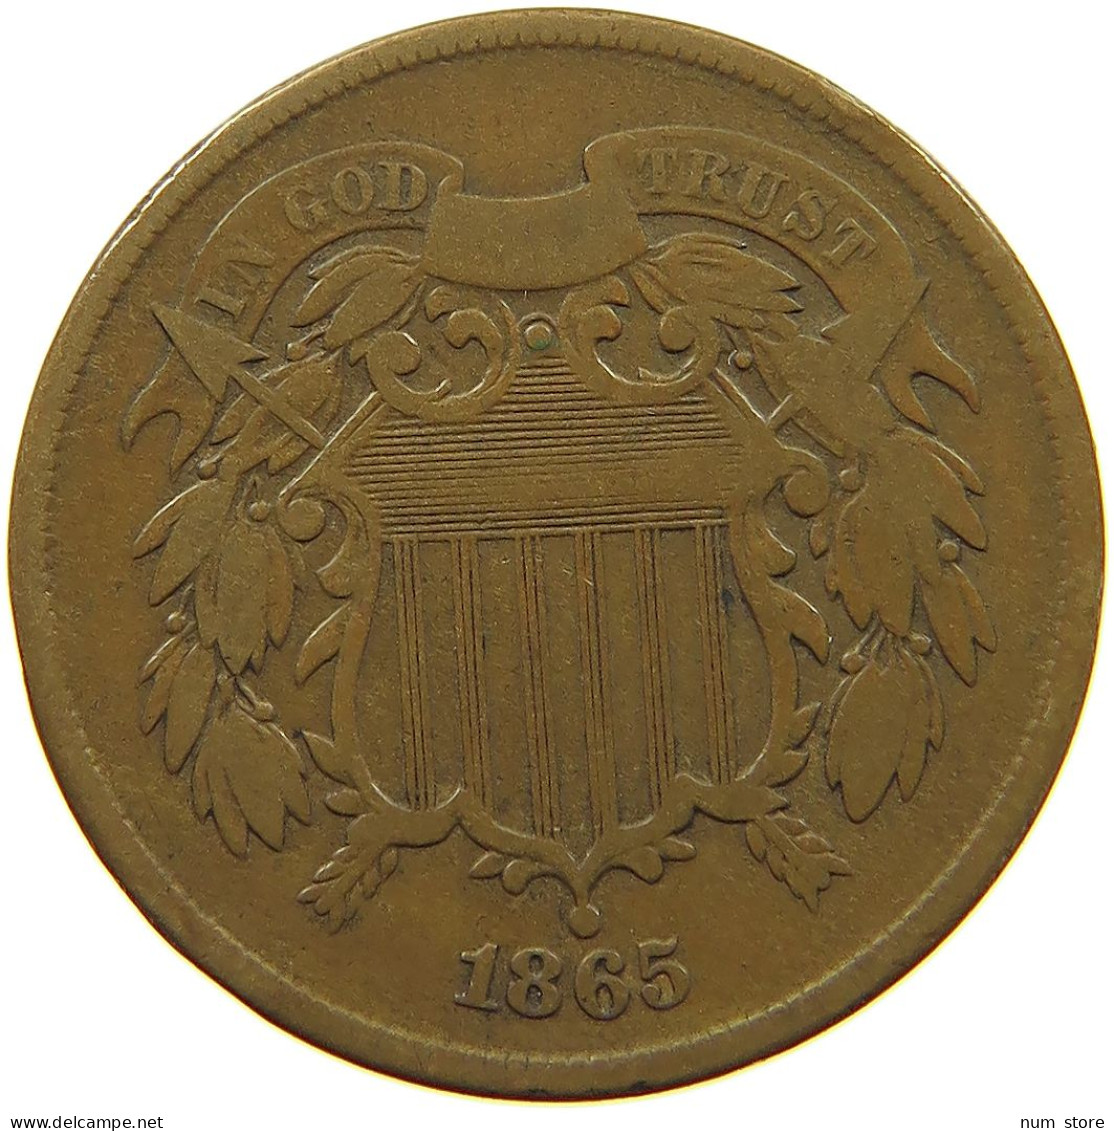 UNITED STATES OF AMERICA 2 CENTS 1865  #c010 0121 - 2, 3 & 20 Cent